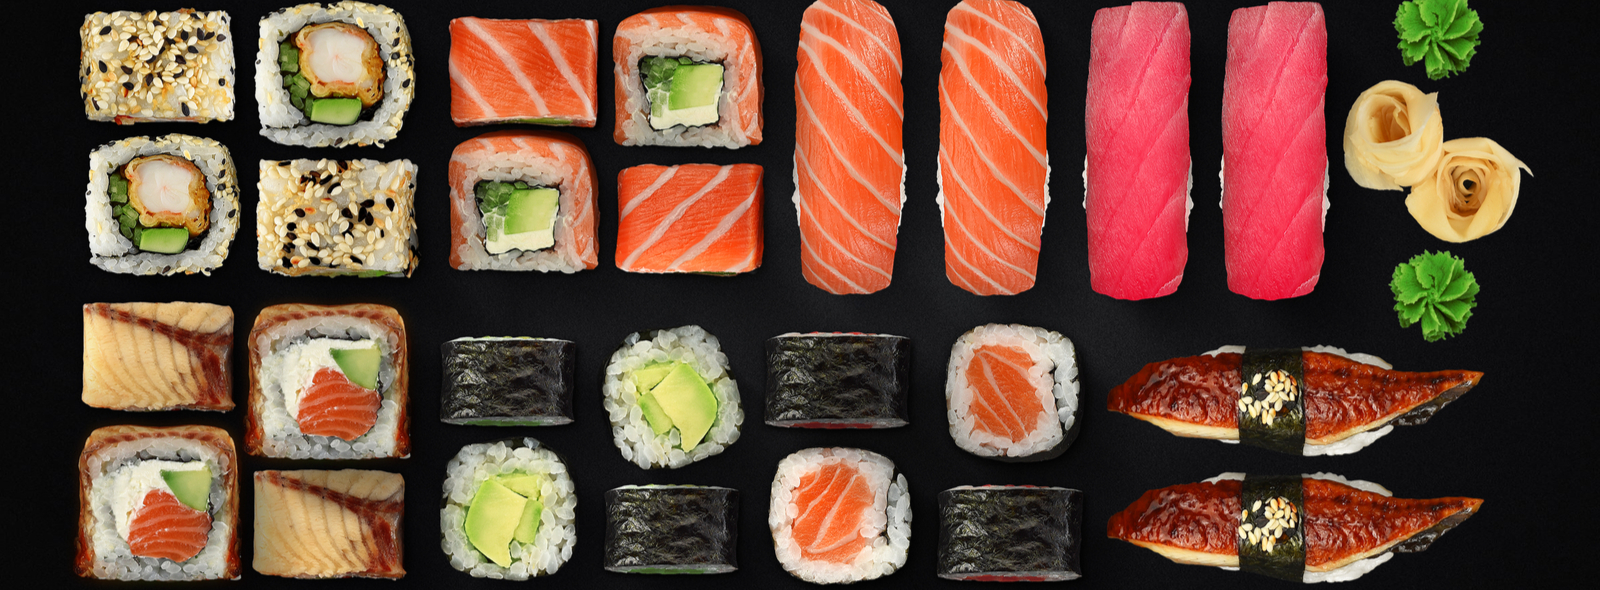 5 tips for preparing the perfect sushi